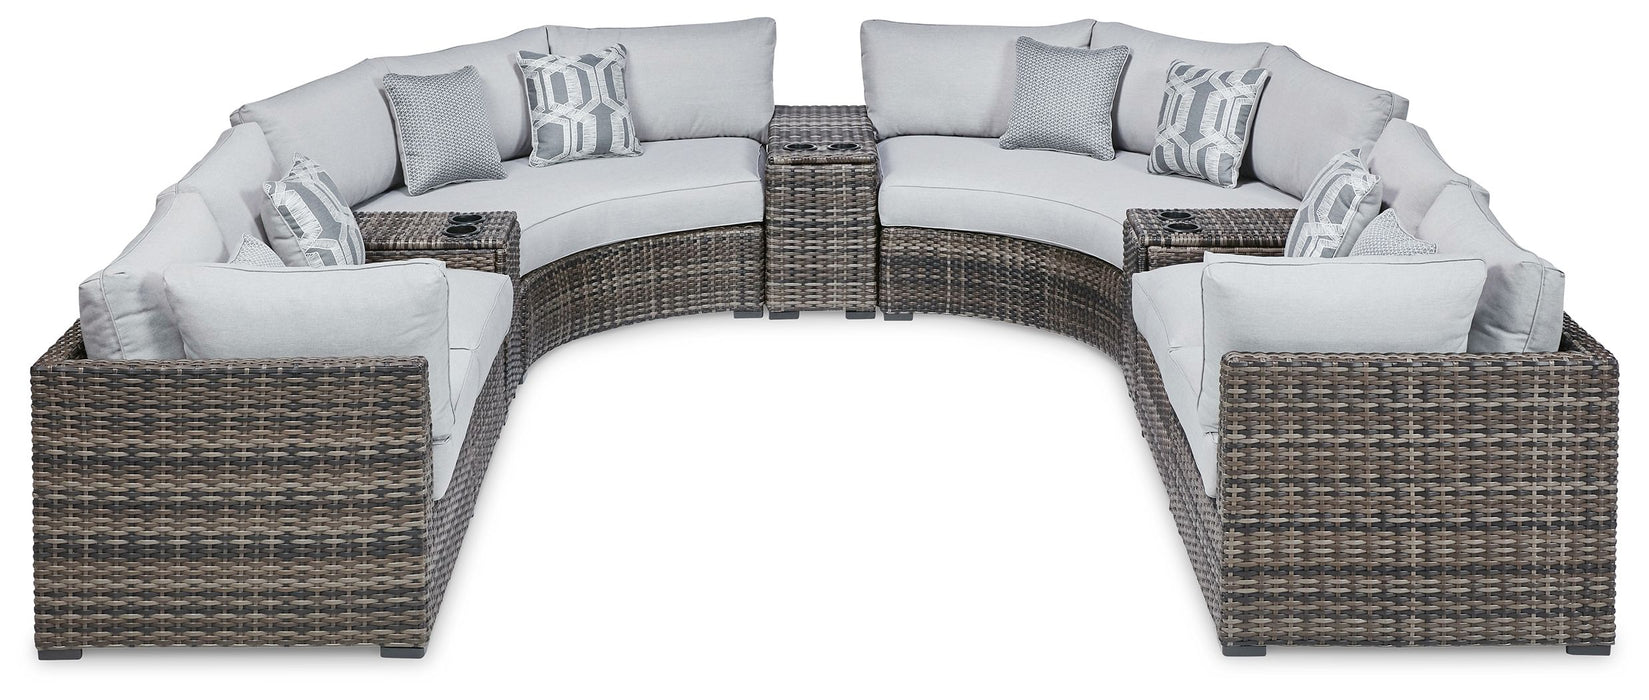 Harbor Court - Gray - 9-Piece Outdoor Sectional Cleveland Home Outlet (OH) - Furniture Store in Middleburg Heights Serving Cleveland, Strongsville, and Online